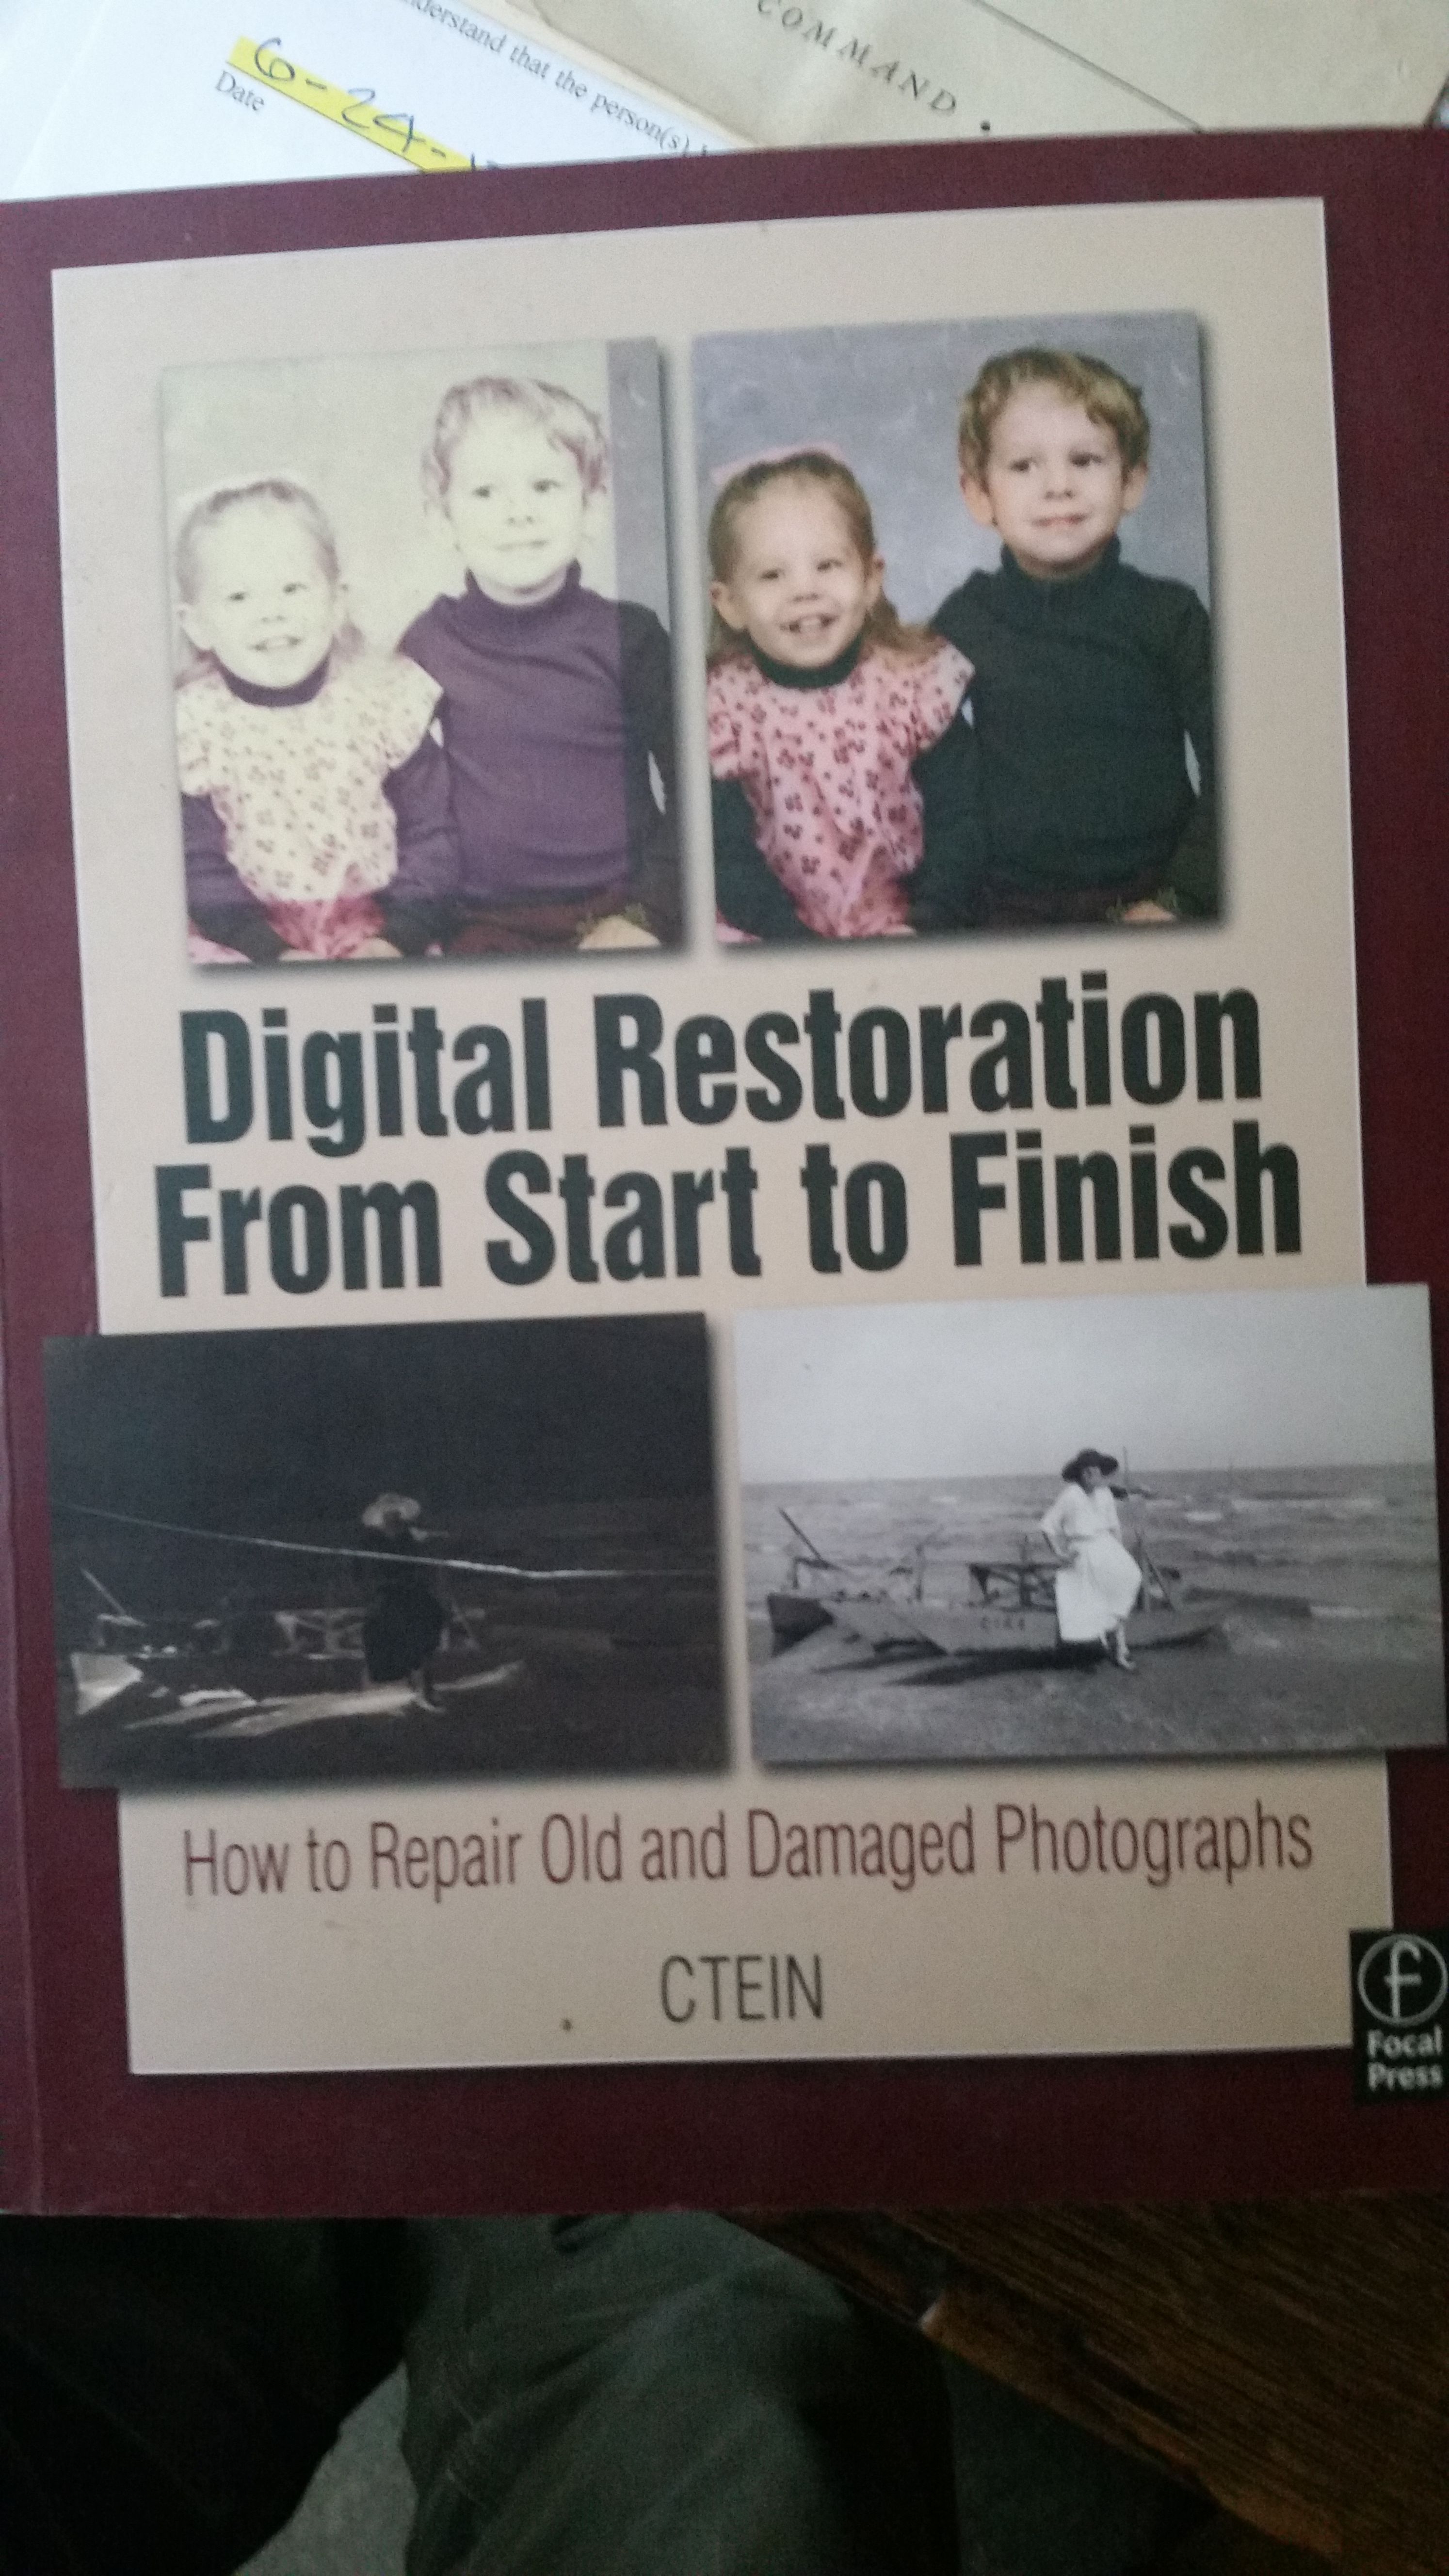 A book on restoring old photographs